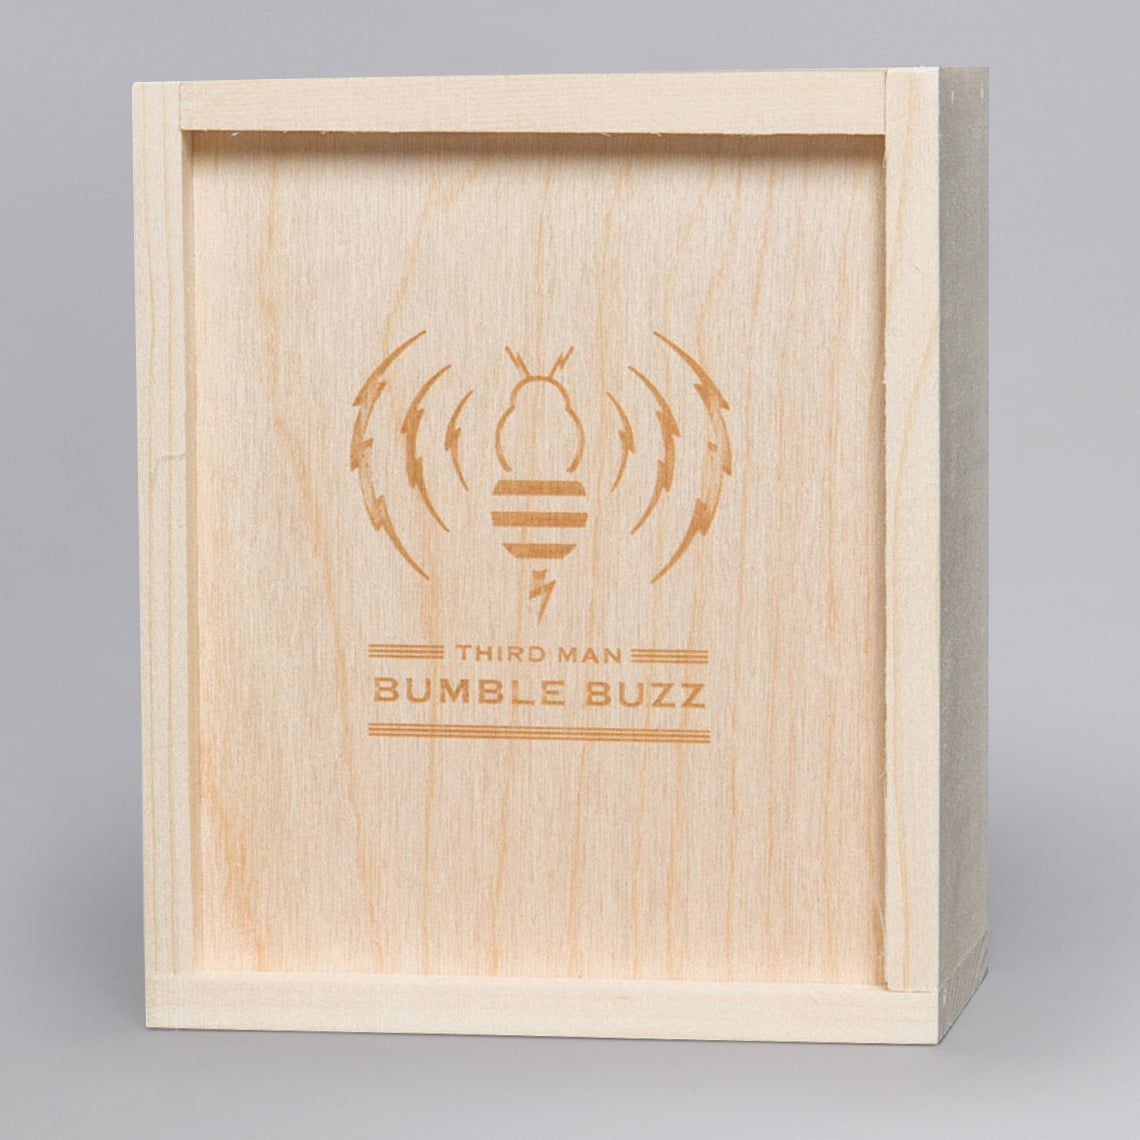 Buzz schematic bumble pedal 2021 UPDATE: